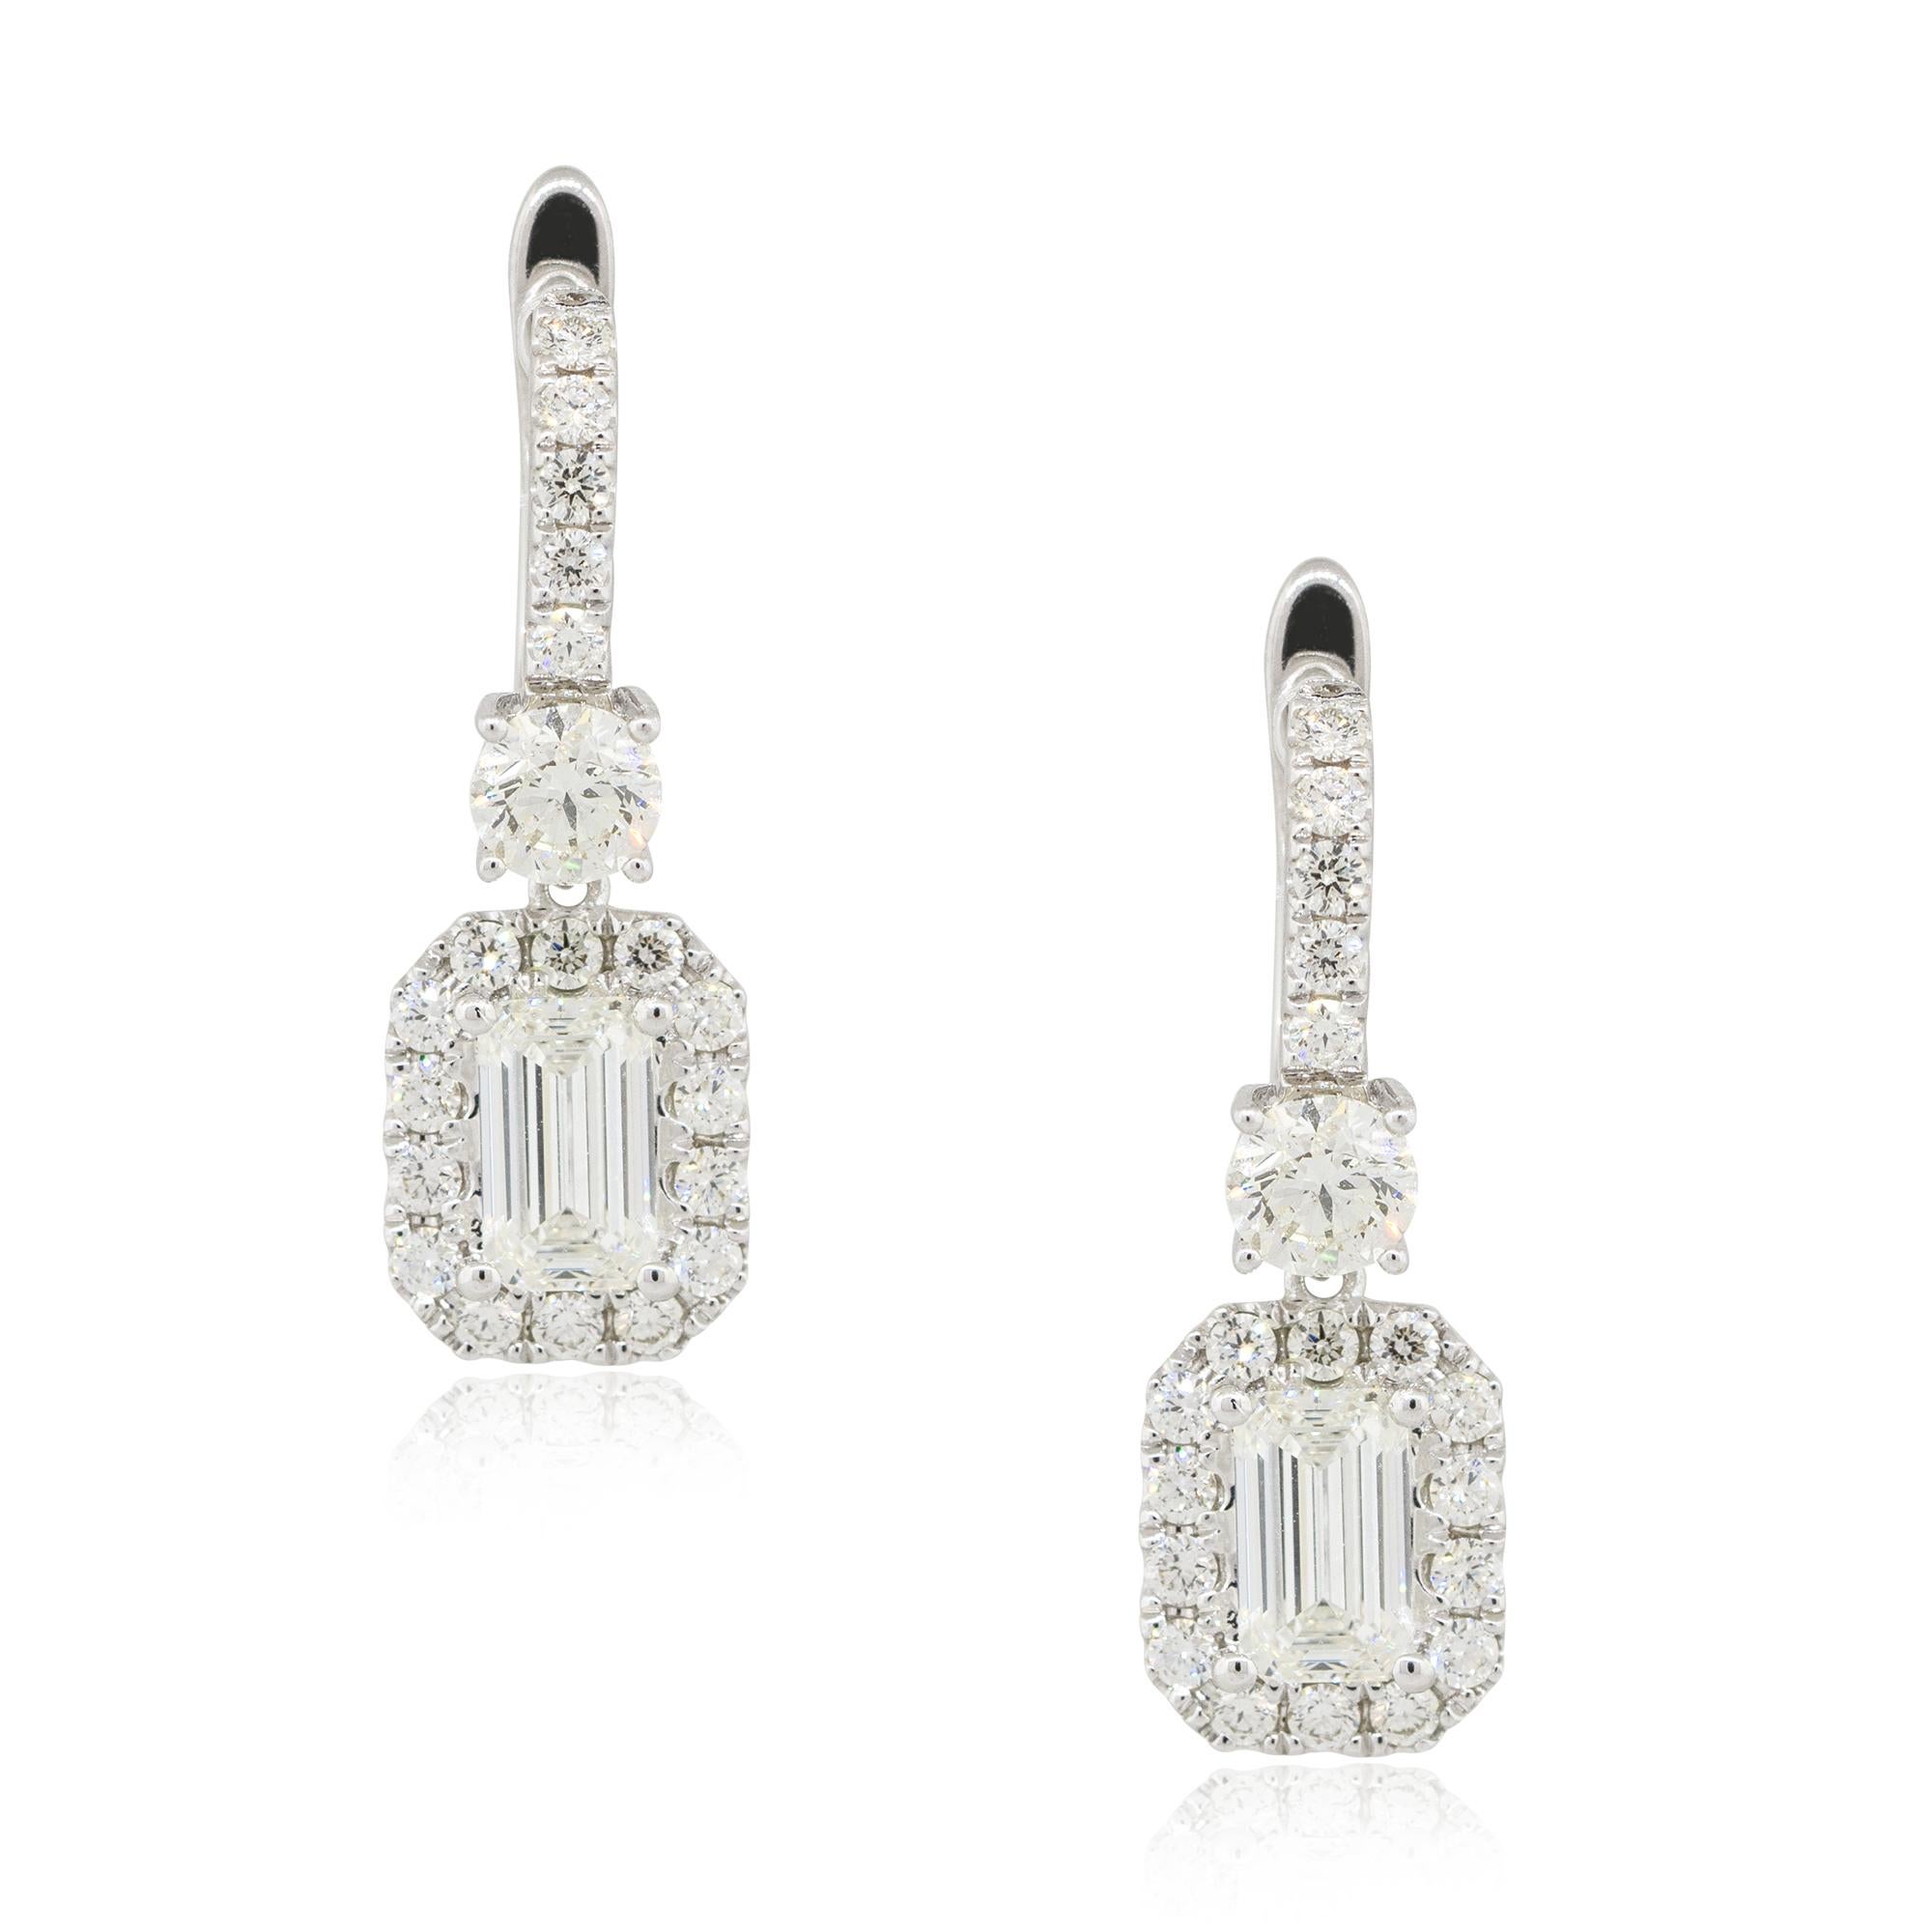 Material: 18k White Gold
Diamond Details: Approx. 1.40ctw of Emerald cut Diamonds. Diamonds are G/H in color and VS in clarity
                             Approx. 1.29ctw of round cut Diamonds. Diamonds are G/H in color and VS in clarity
          